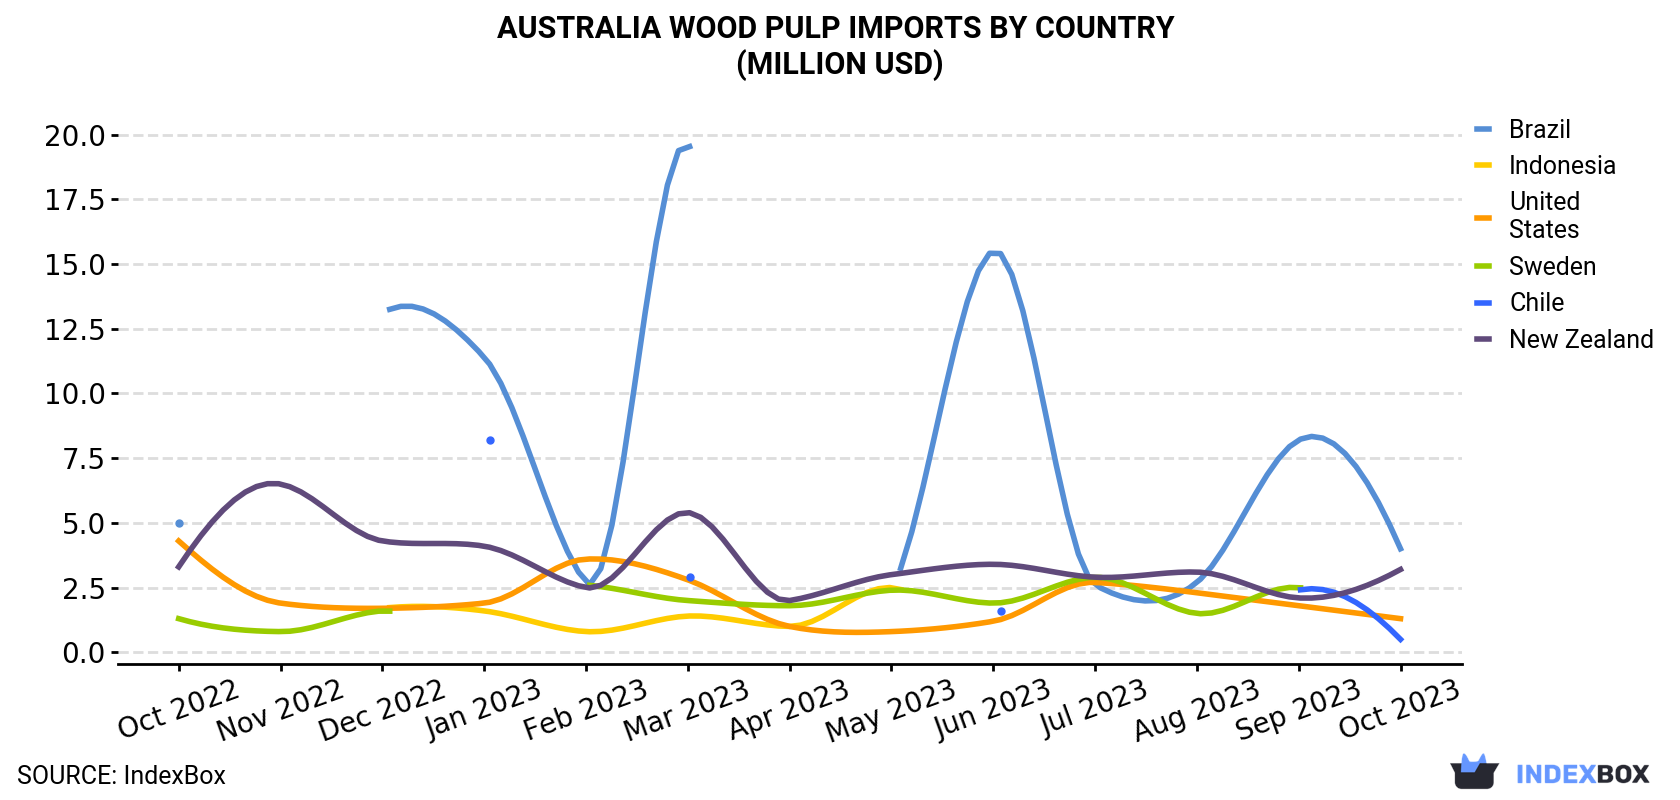 Australia Wood Pulp Imports By Country (Million USD)